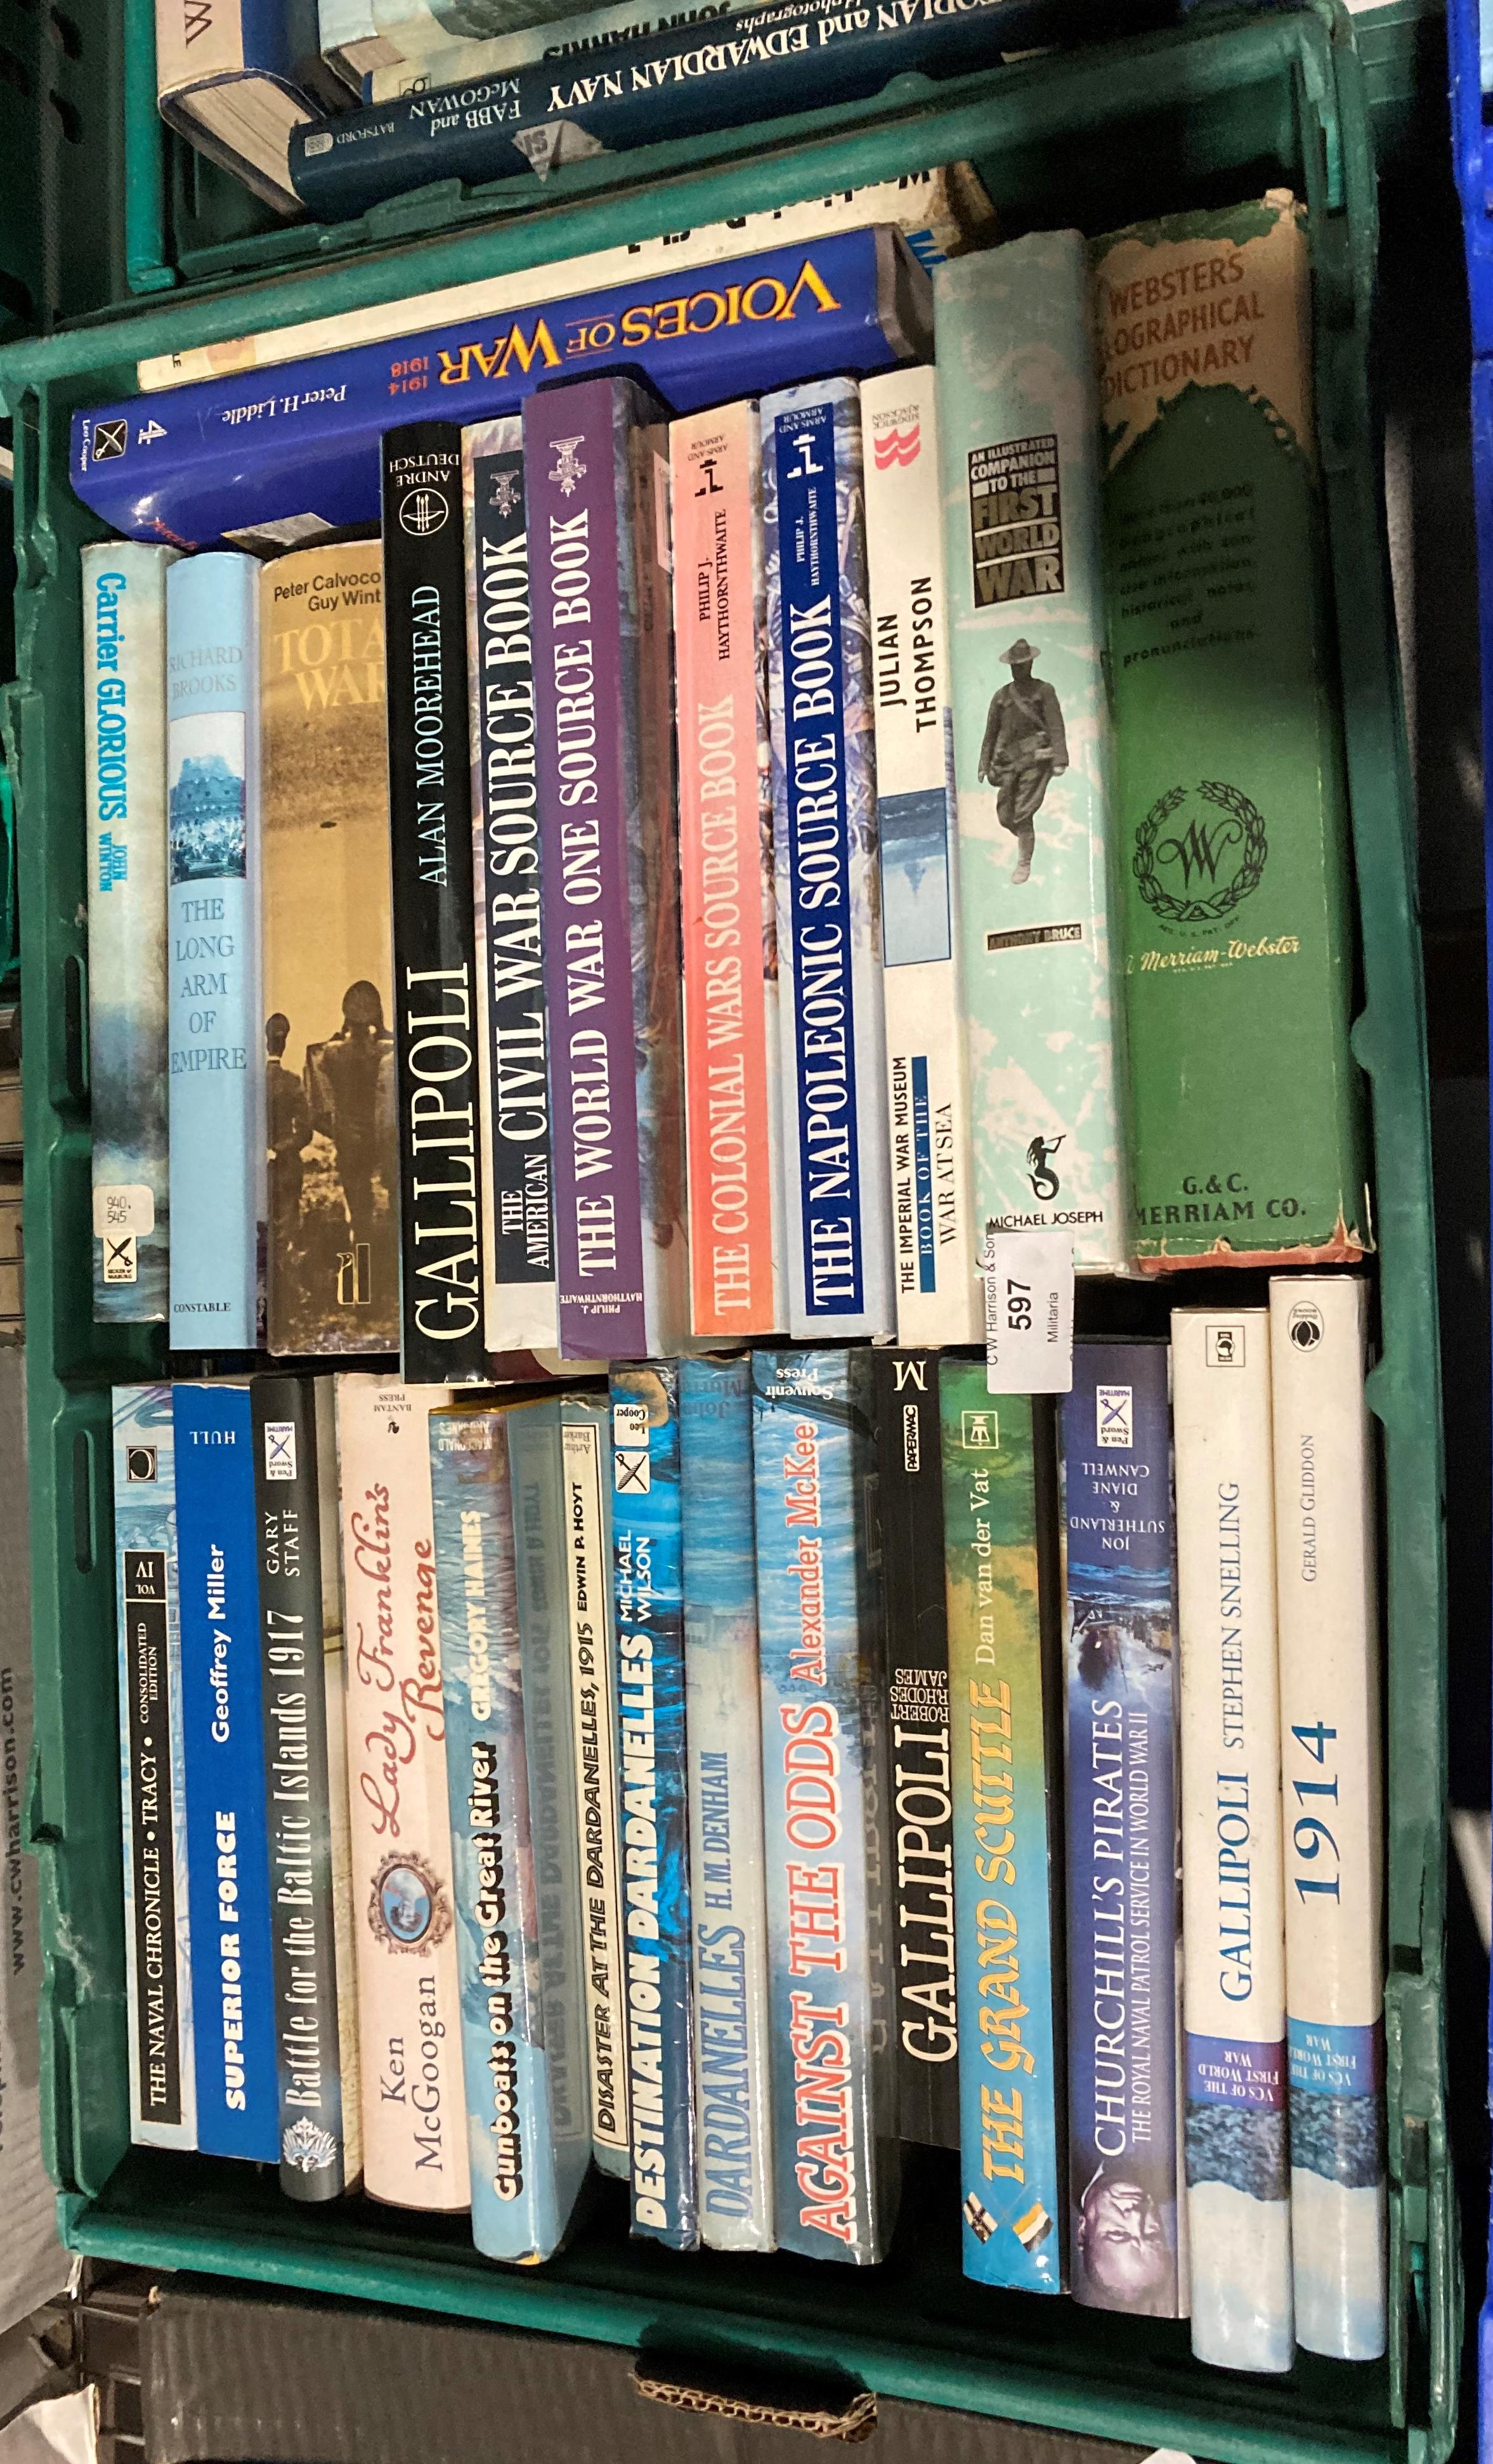 Contents to green plastic crate - 27 books relating to maritime, naval and other warfare, etc.